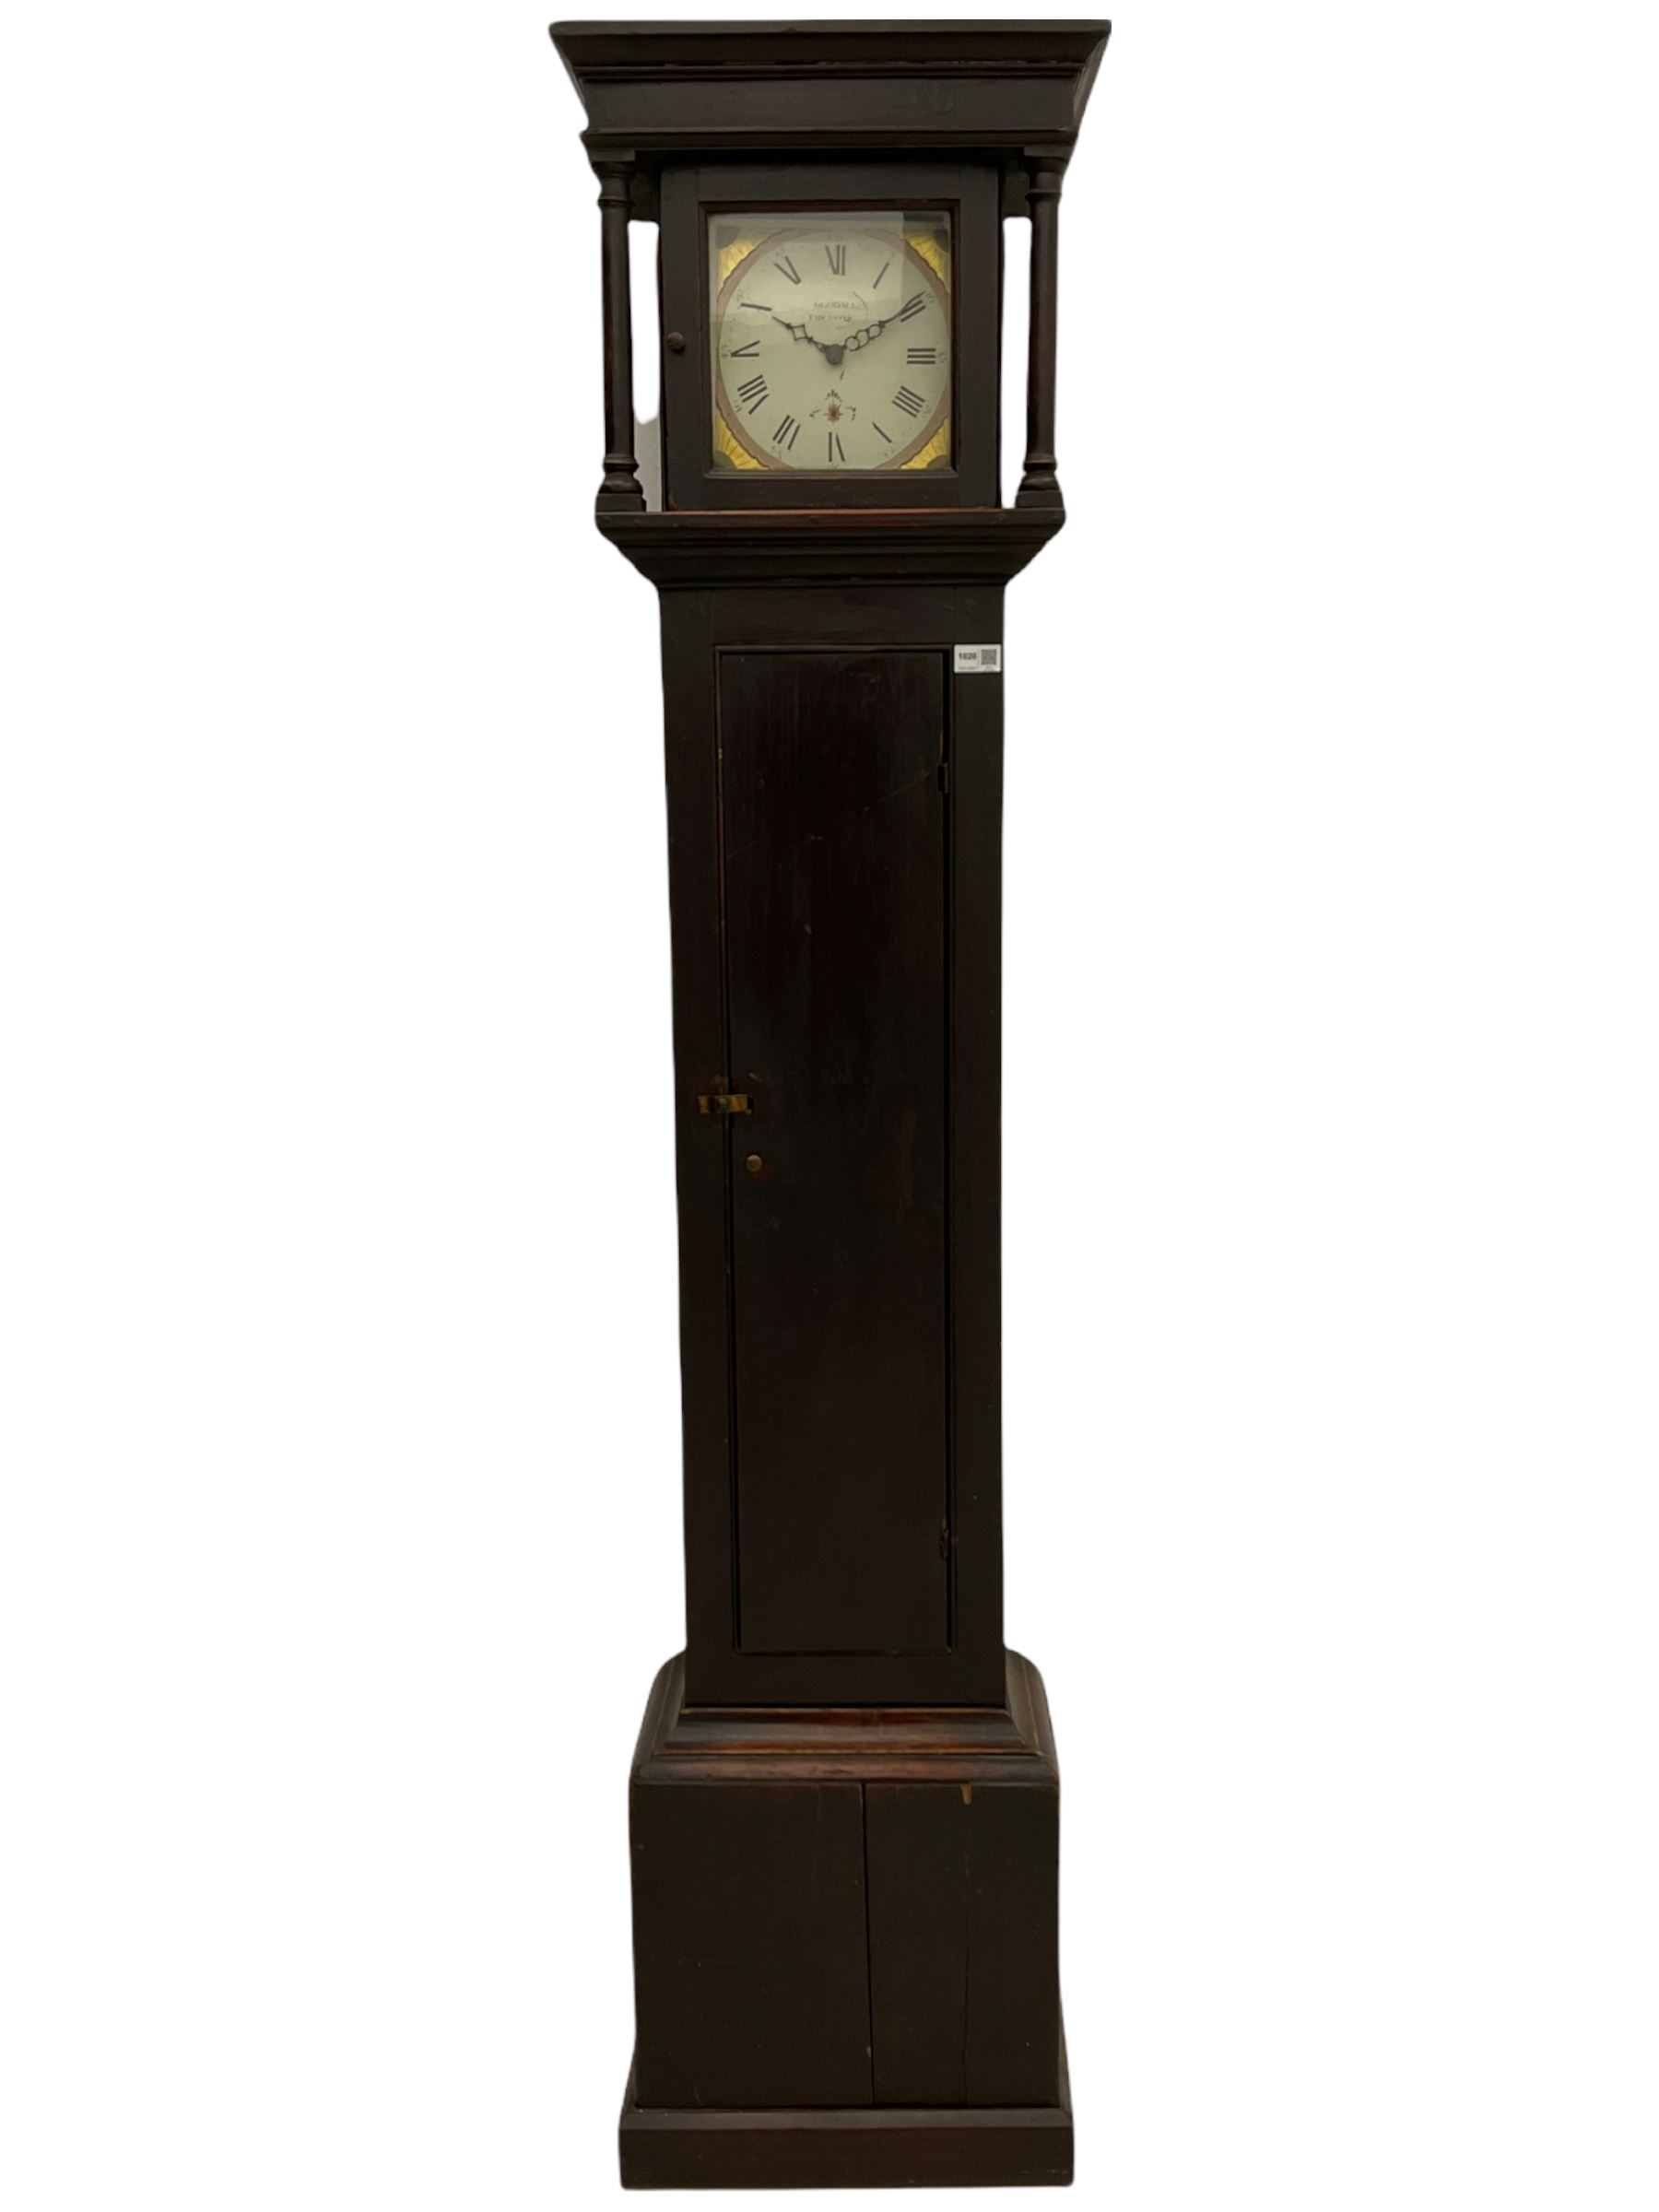 A provincial 30-hour chain driven longcase clock in an oak finished case with a flat top and wide co